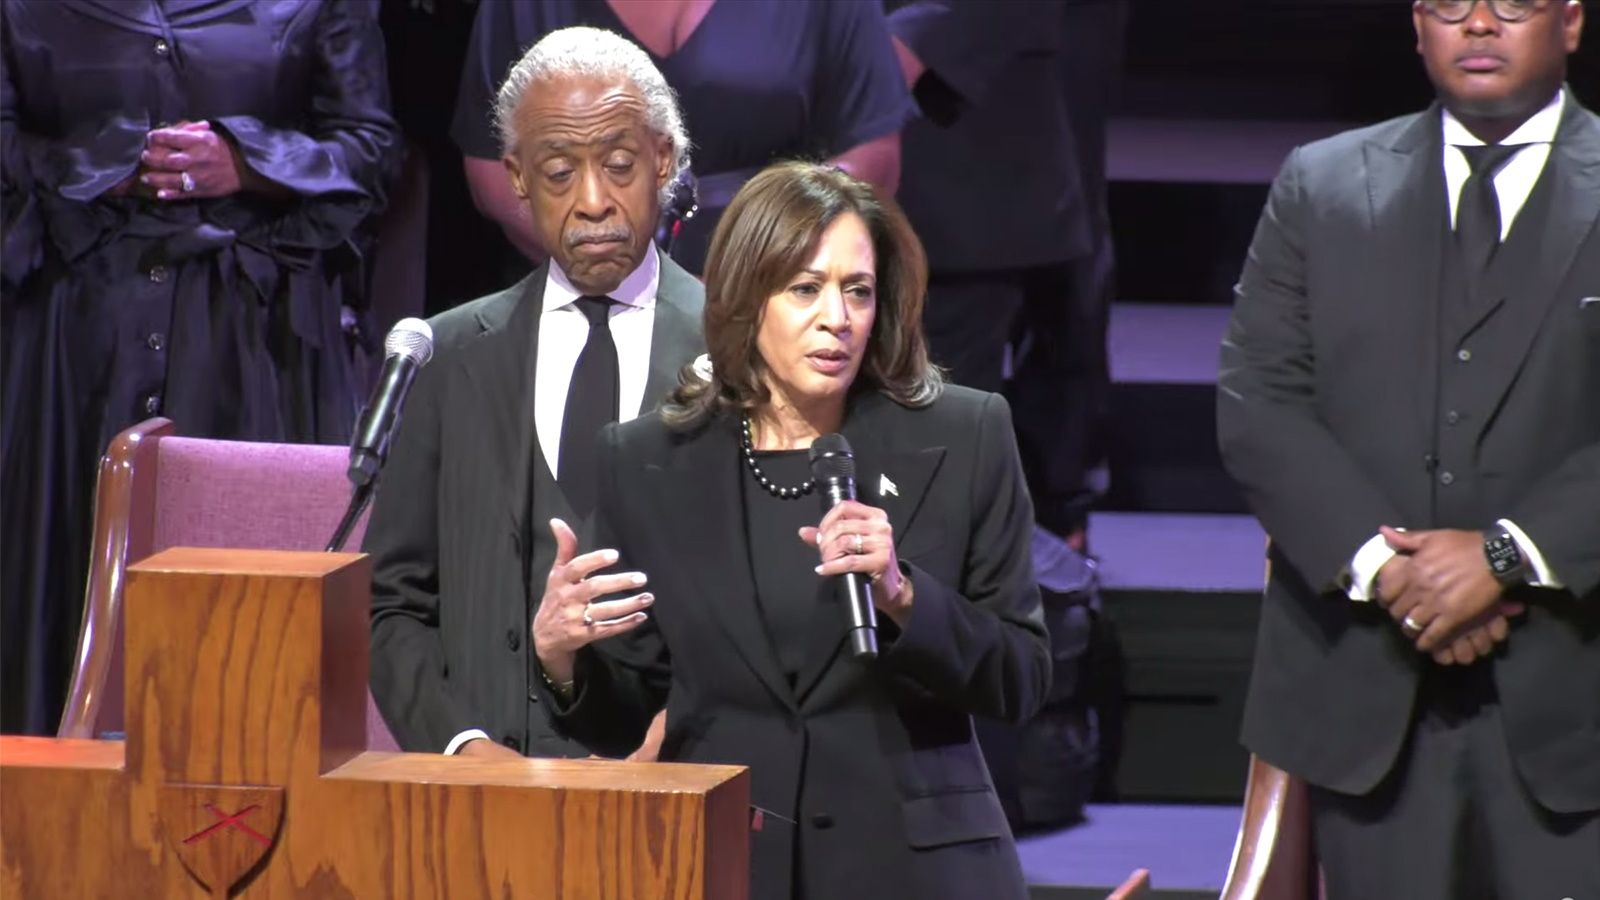 At Tyre Nichols’ funeral, VP Harris and Sharpton among those praying and promising reform